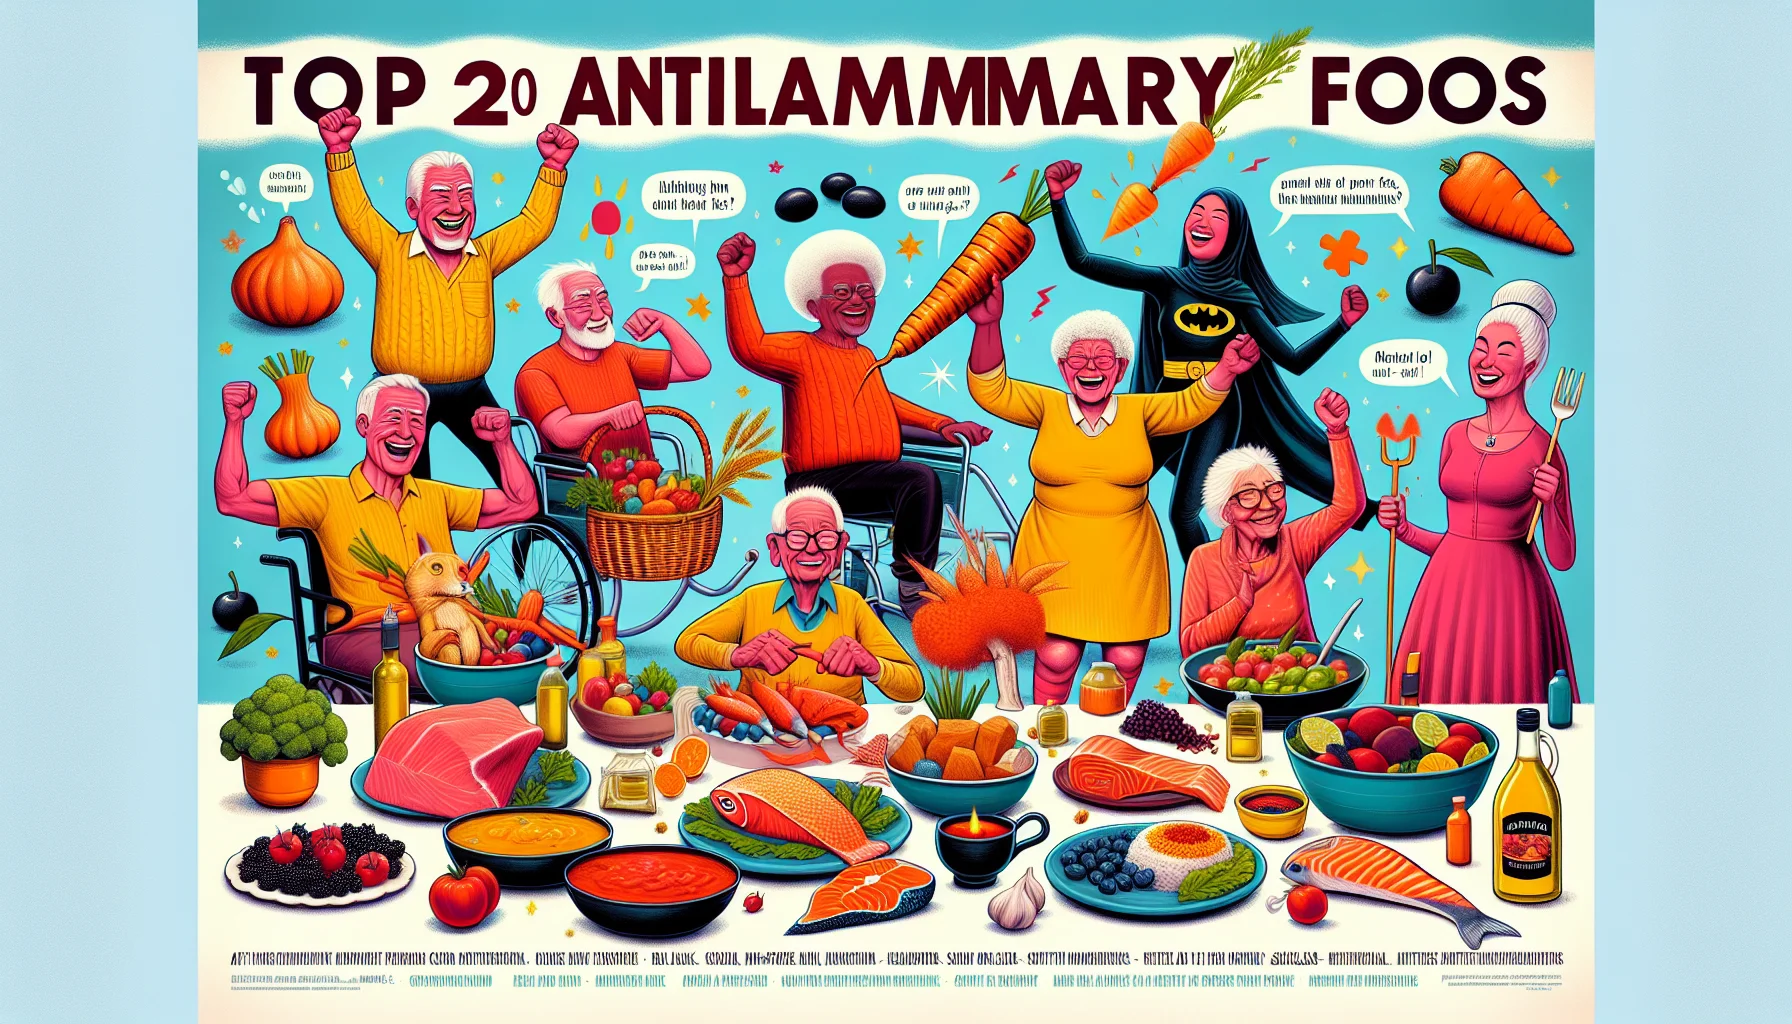 Create an image of a humorously designed educational poster representing the top 20 anti-inflammatory foods. The poster features a group of happy elderly people of diverse descents like Caucasian, Black, Middle-Eastern, South Asian and Hispanic, gleefully engaging in a potluck feast filled with these foods. Every person is representing their own humorous imaginations of healthy living and dieting. The vibrant illustration should mix reality with playful exaggerations to bring natural foods to life, such as a curcuma root doing yoga, salmon wearing a superhero cape, or an olive oil bottle dancing salsa. Include a tasteful title and some fun food facts.